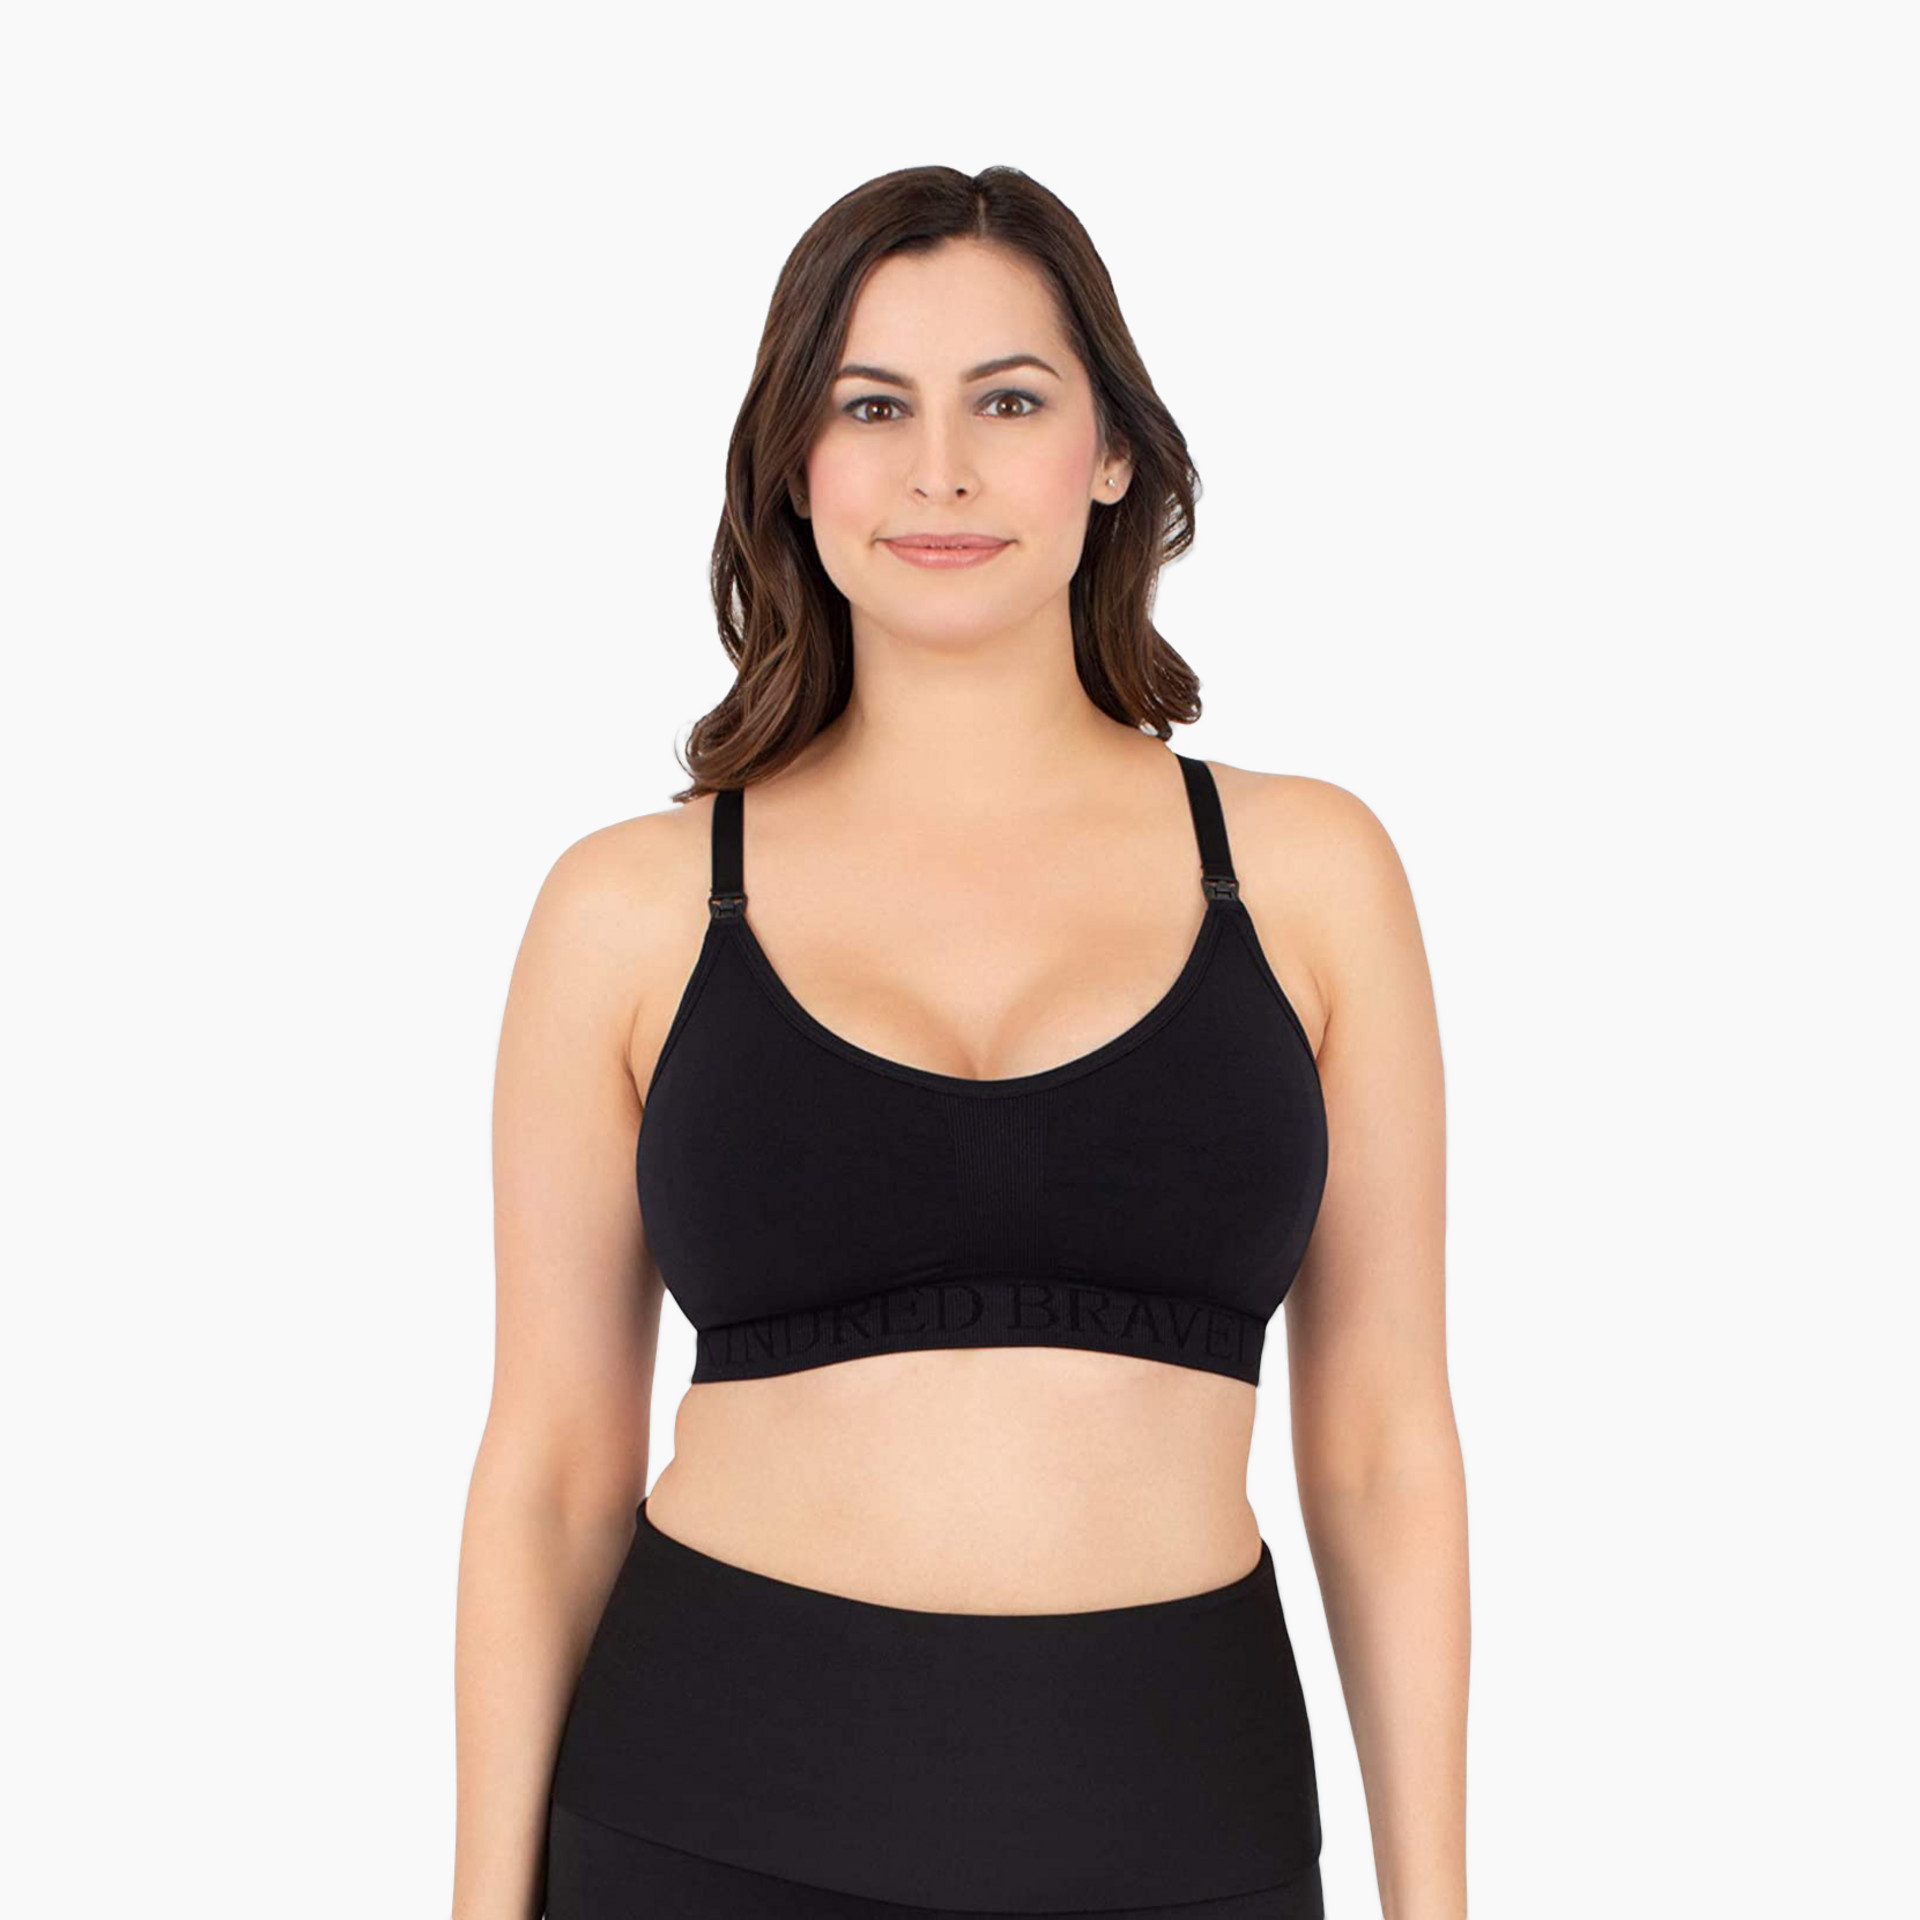 Kindred Bravely Sublime Support Low Impact Nursing & Maternity Sports Bra -  Seaglass Heather, Medium-Busty